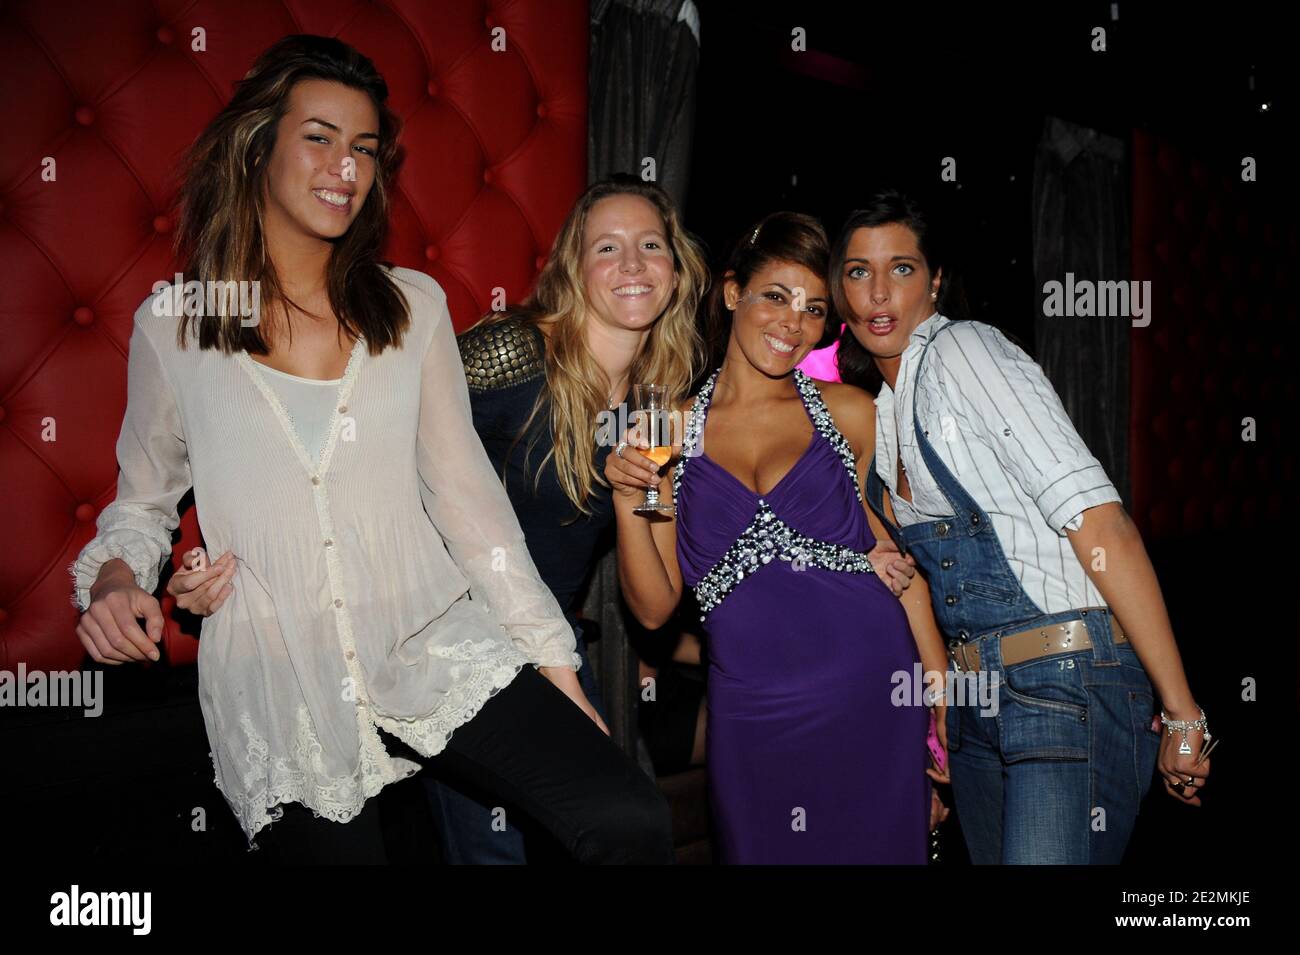 French striptease performer Miss Amal (in violet) poses with contestants of  TV program, 'Moundir, l'aventurier de l'amour', Marie, Clemence and  Stephana during a party held at the Montecristo in Paris, France on